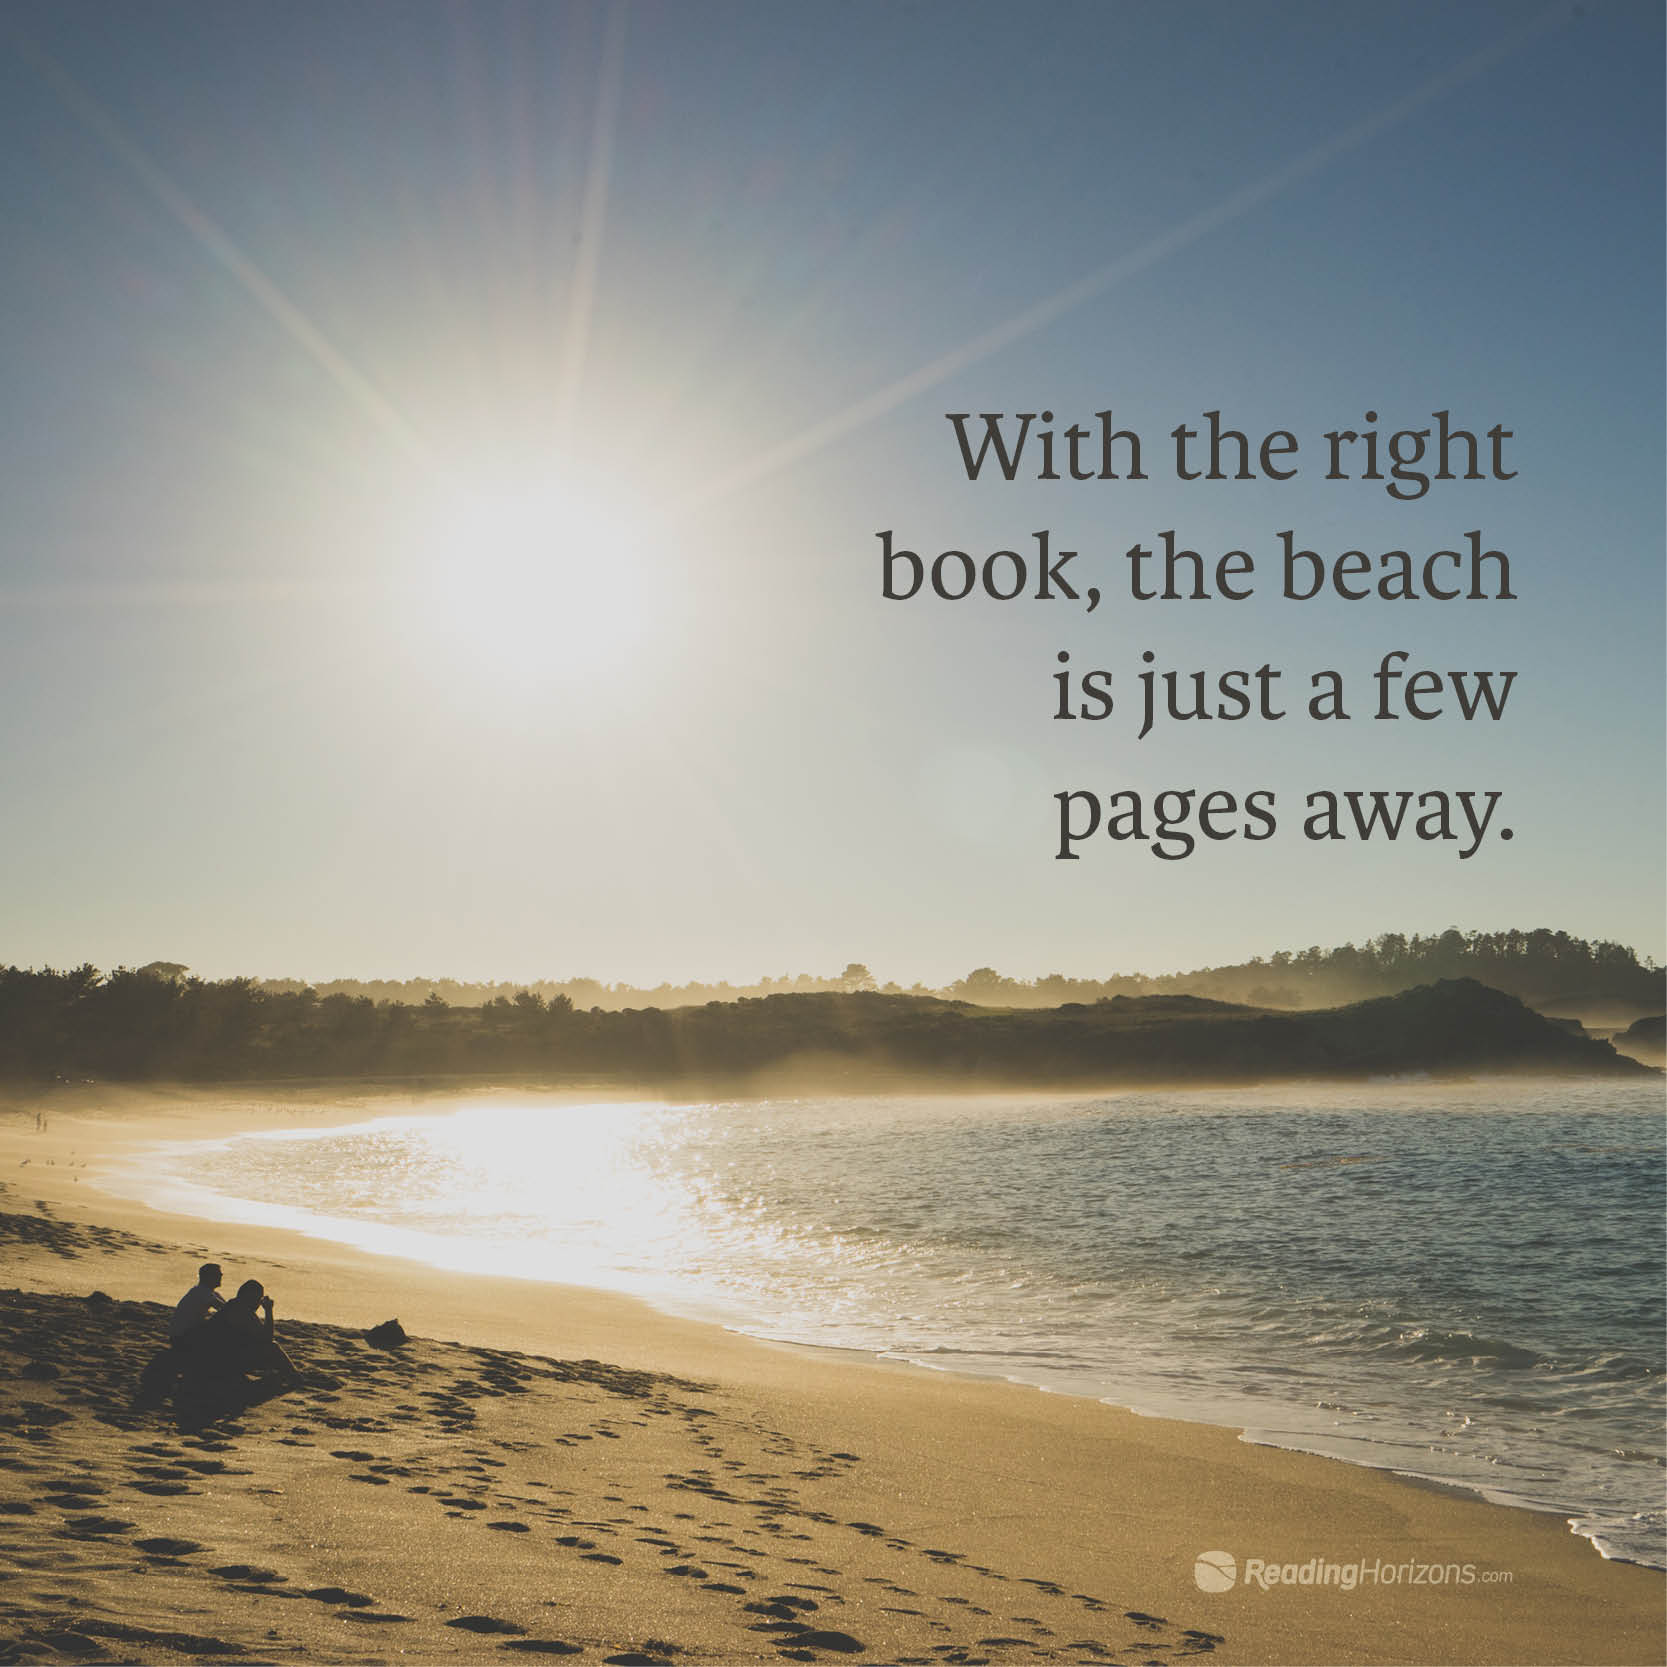 A meme of a landscape image of a sunny sky and beach with the words "With the right book, the beach is just a few pages away"